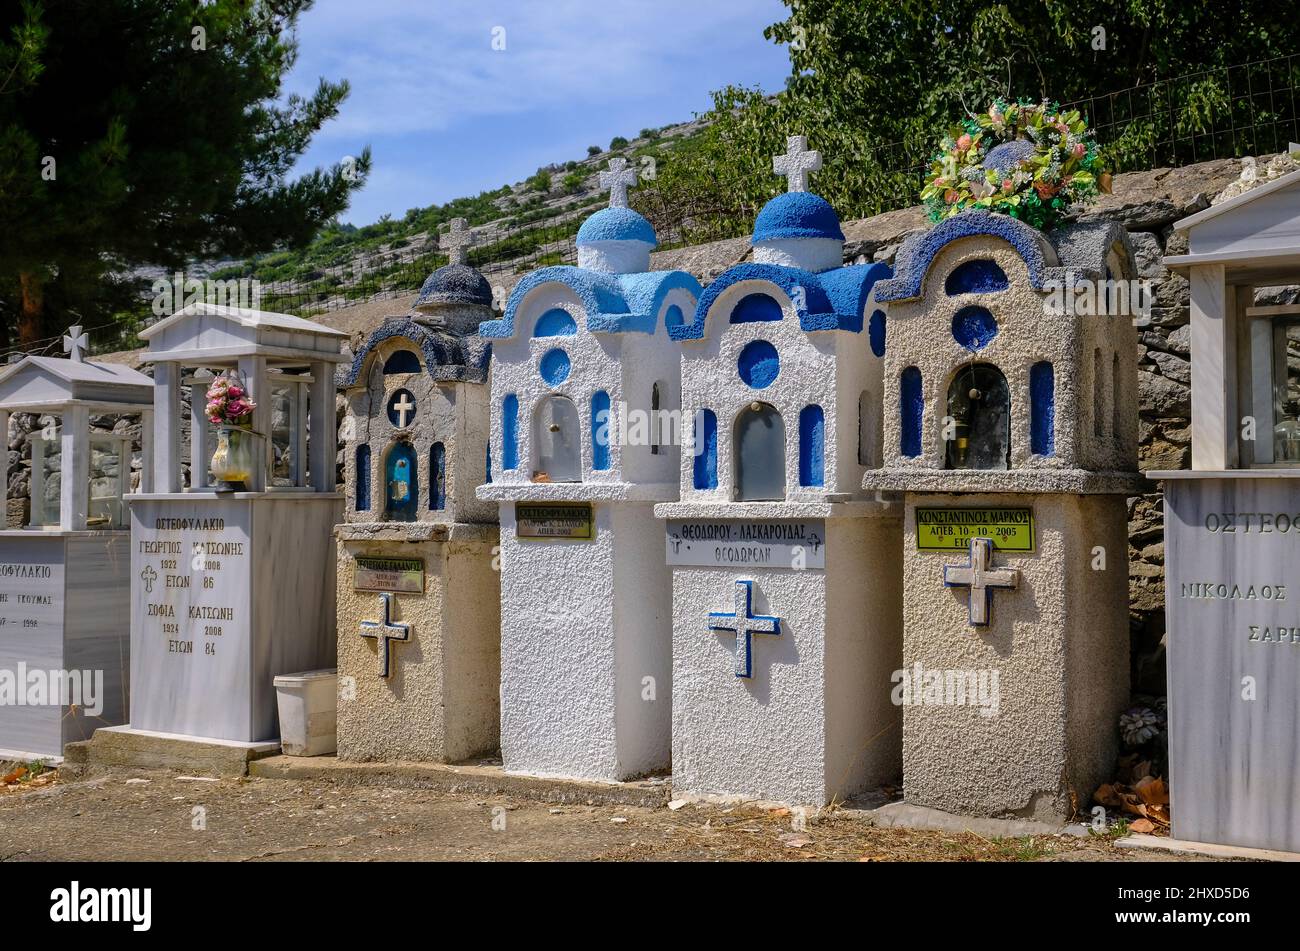 Theologos, Thassos, Greece - Greek Orthodox cemetery with traditional small prayer chapels in the mountain village of Theologos on the island of Thassos. The mountain village Theologos is a popular destination for vacationers. Thassos belongs to Eastern Macedonia and Thrace, also Eastern Macedonia and Thrace. Stock Photo